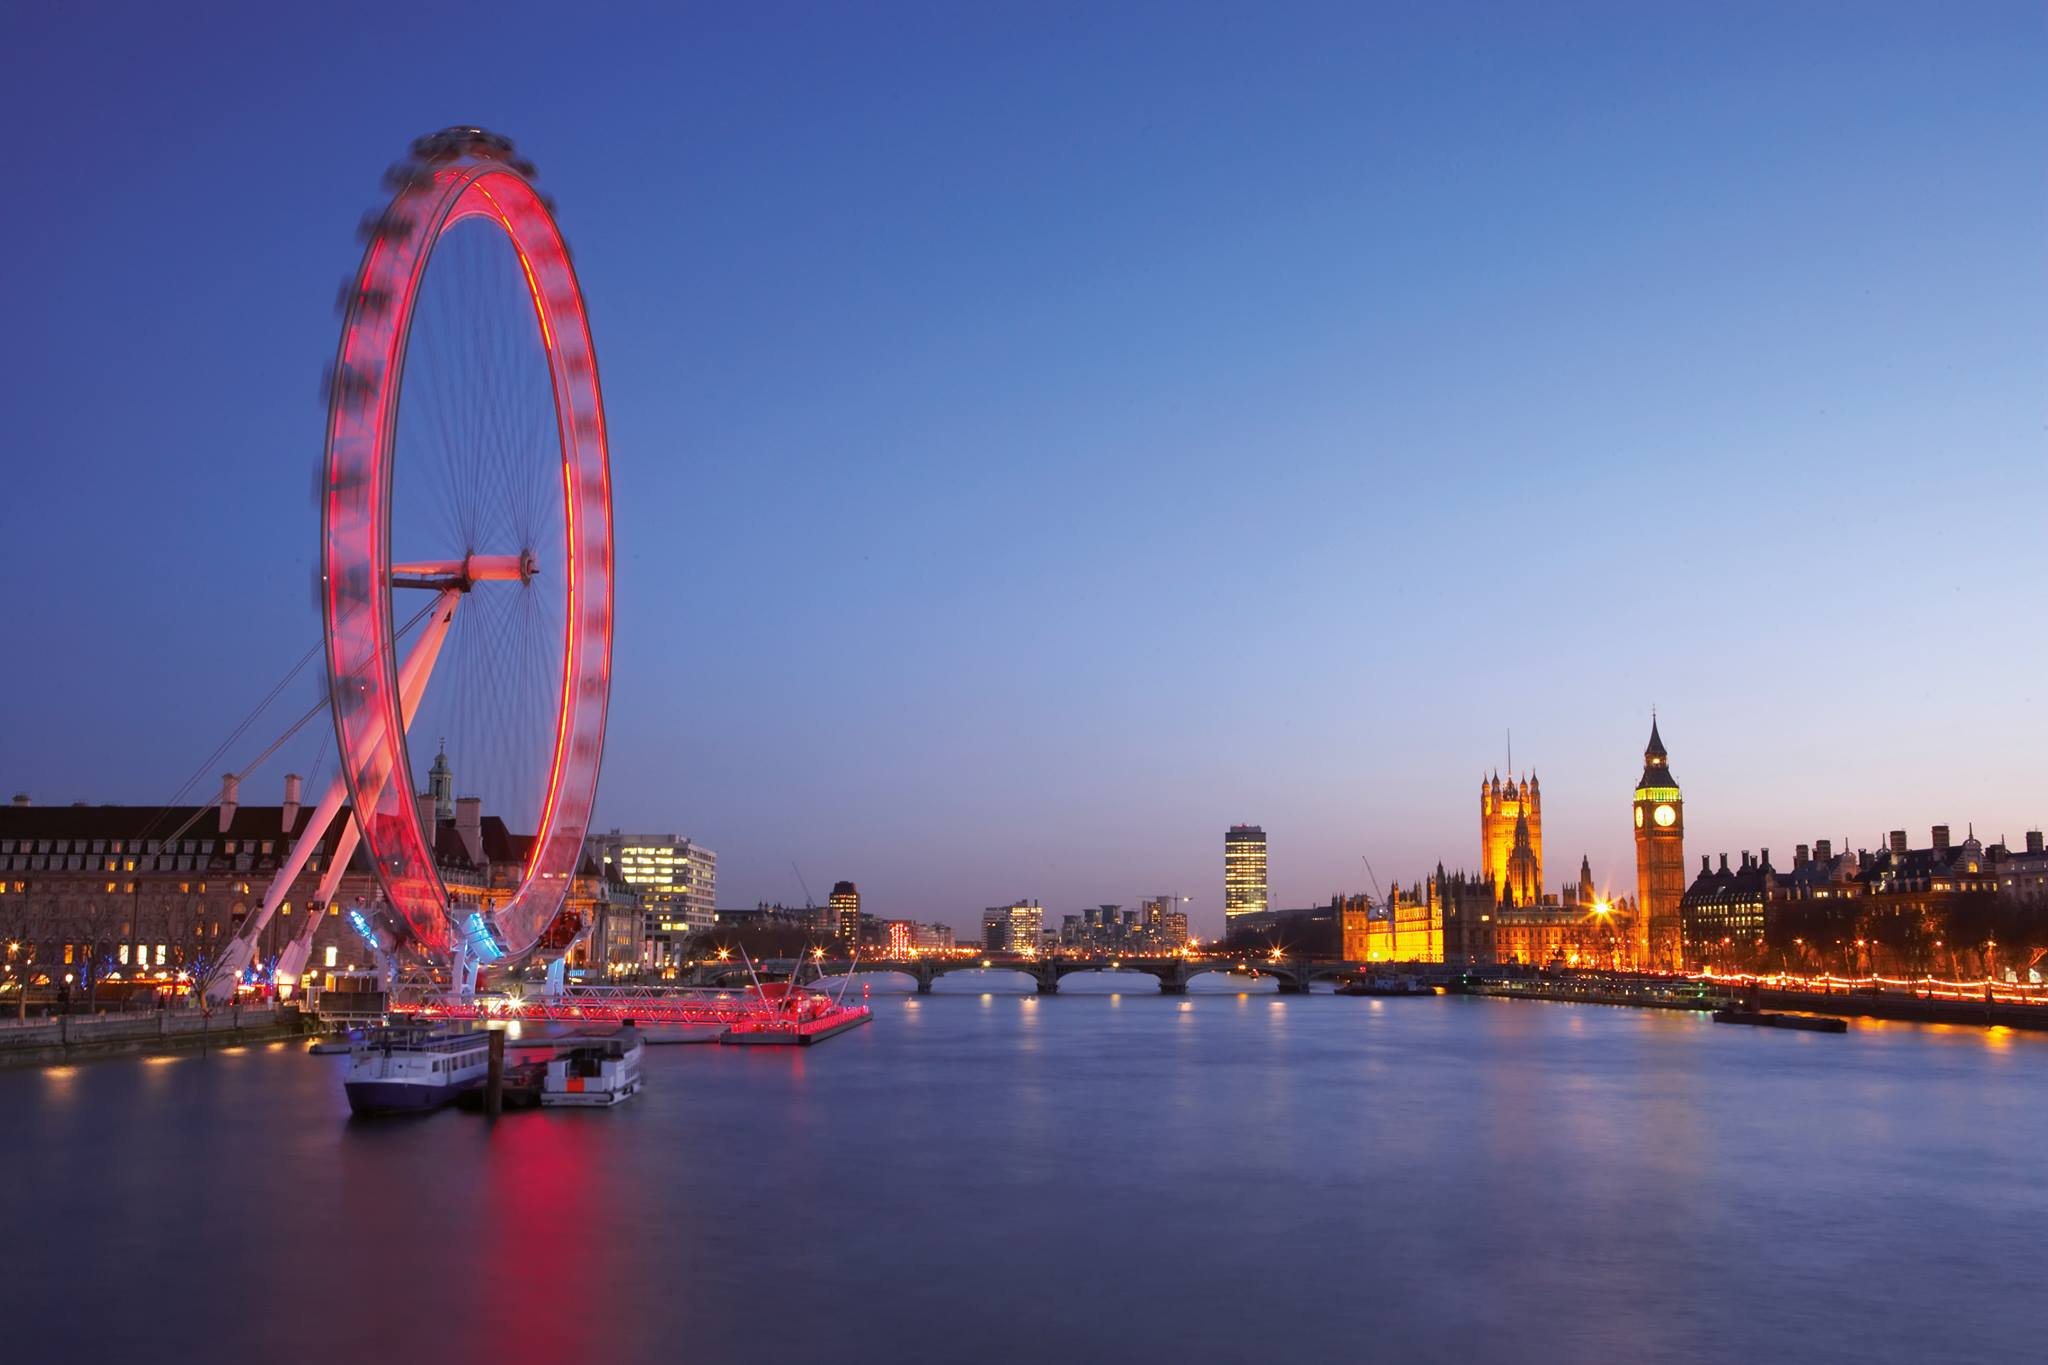 London Eye Discount Tickets Boundless by CSMA